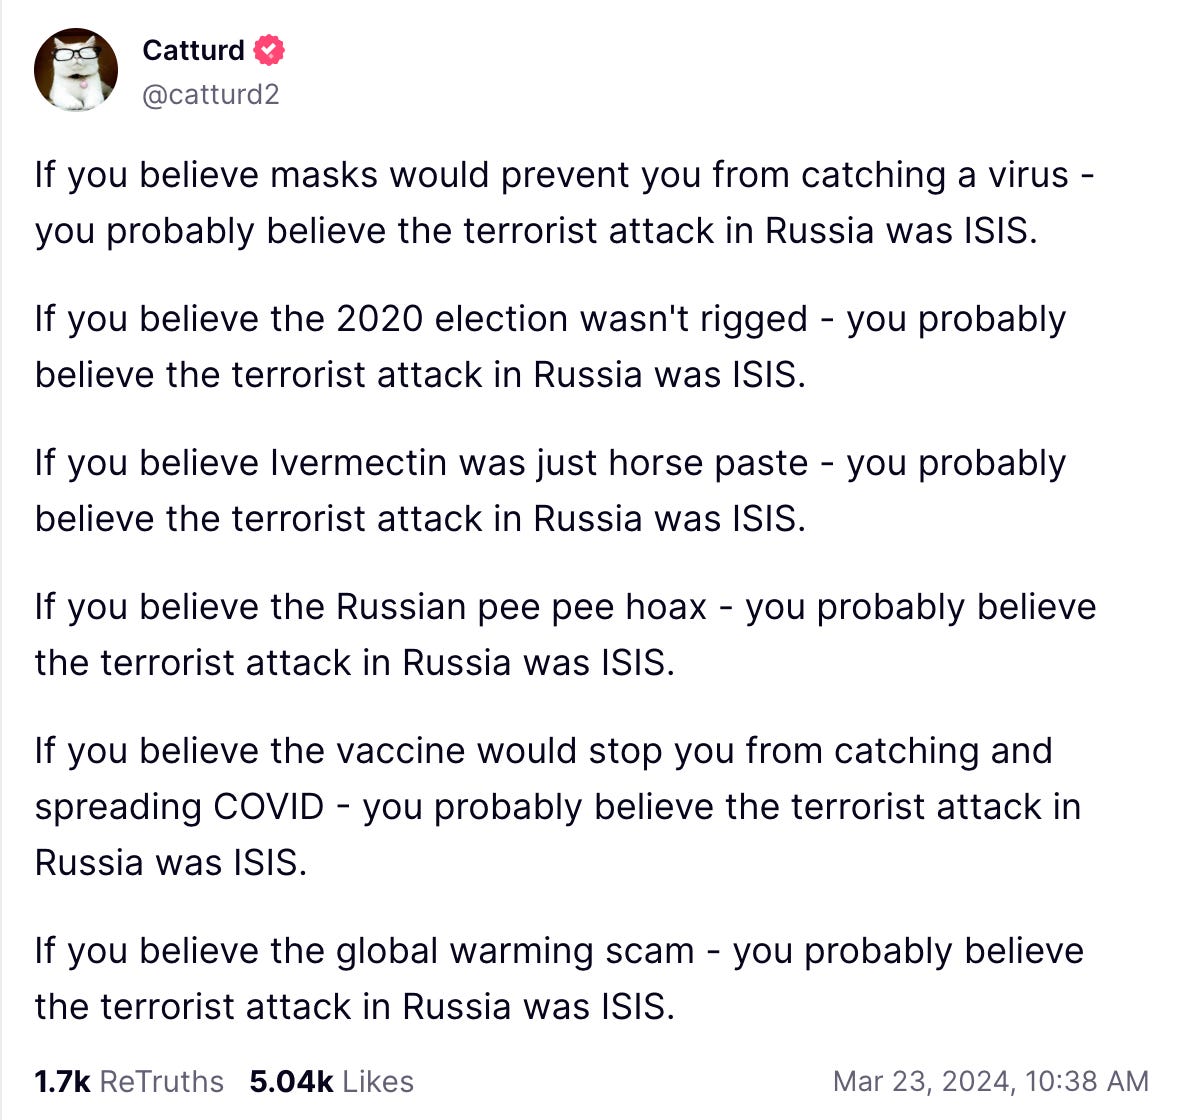 Truth Social post by notorious troll Catturd2: If you believe masks would prevent you from catching a virus - you probably believe the terrorist attack in Russia was ISIS.   If you believe the 2020 election wasn't rigged - you probably believe the terrorist attack in Russia was ISIS.  If you believe Ivermectin was just horse paste - you probably believe the terrorist attack in Russia was ISIS.  If you believe the Russian pee pee hoax - you probably believe the terrorist attack in Russia was ISIS.  If you believe the vaccine would stop you from catching and spreading COVID - you probably believe the terrorist attack in Russia was ISIS.  If you believe the global warming scam - you probably believe the terrorist attack in Russia was ISIS.